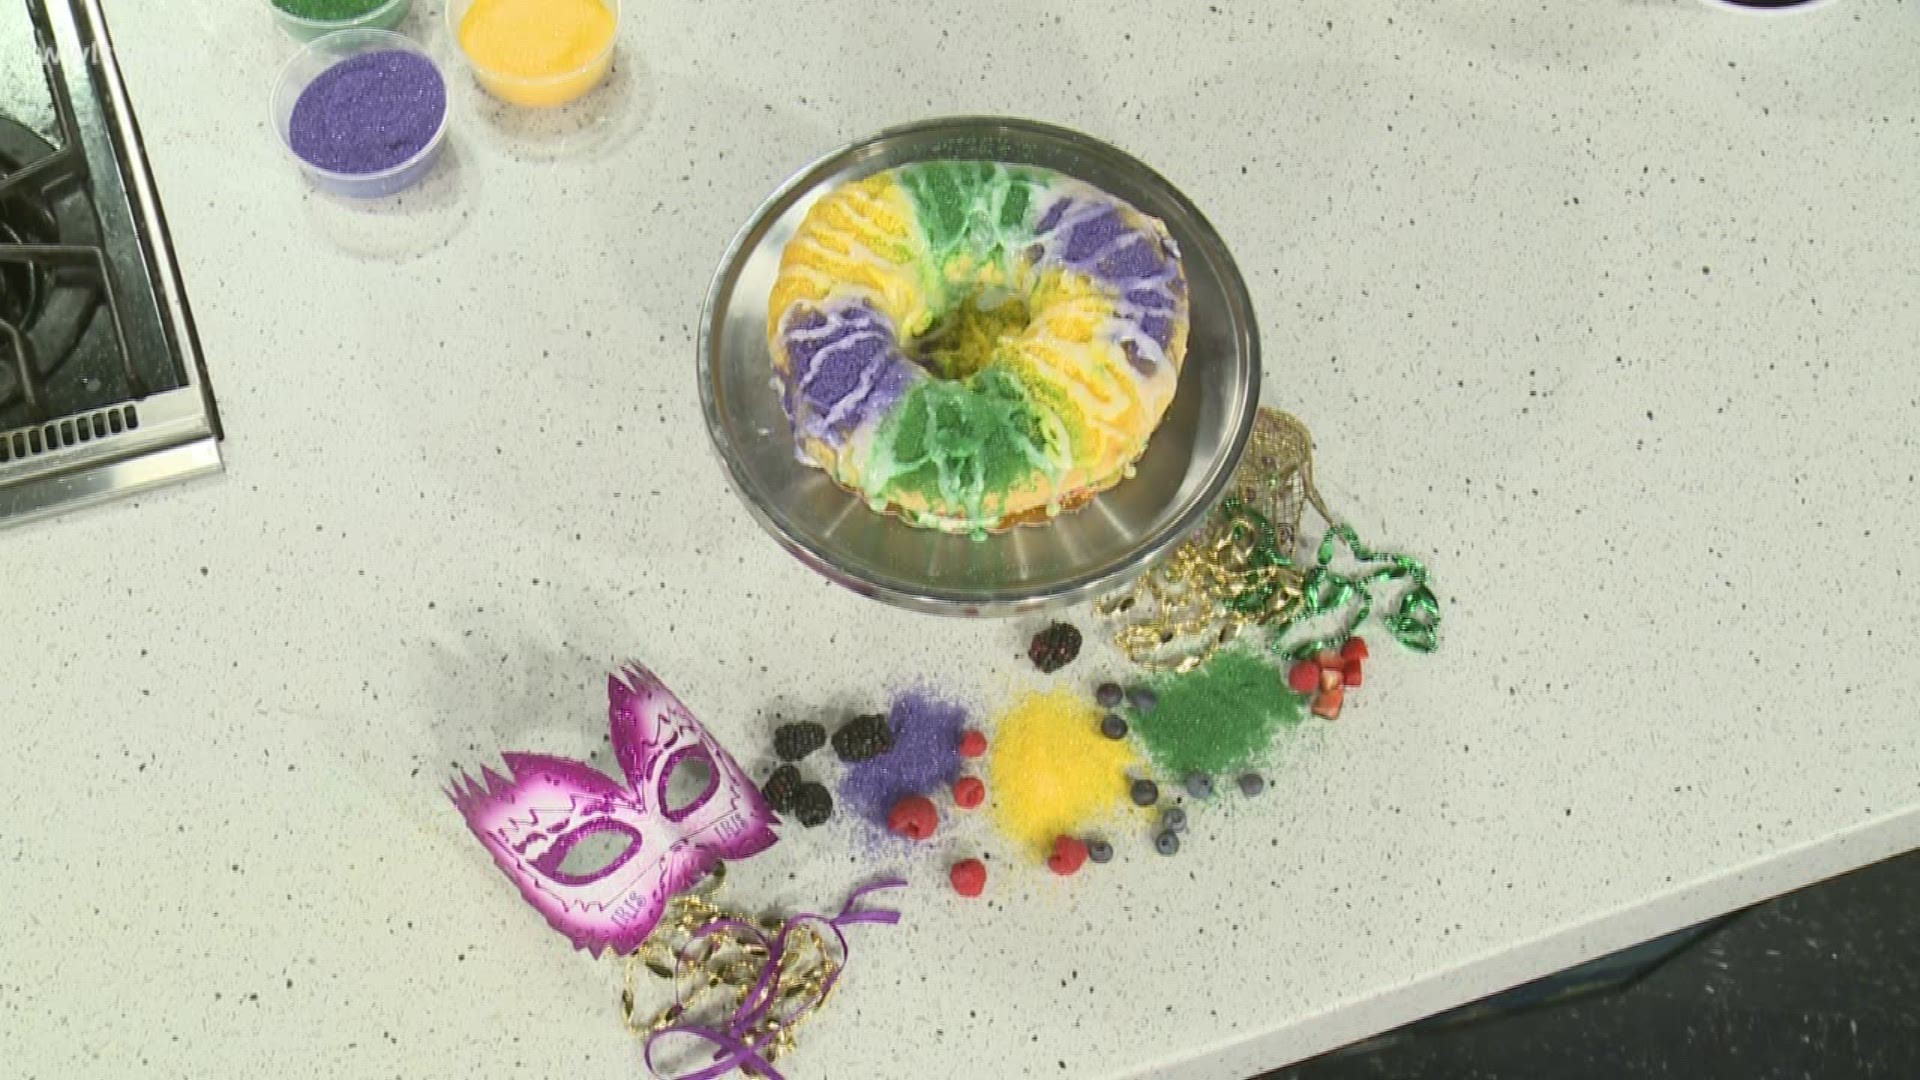 We are in the kitchen with Chaya Conrad getting a taste of Bywater Bakery's famous Chantilly King Cake.